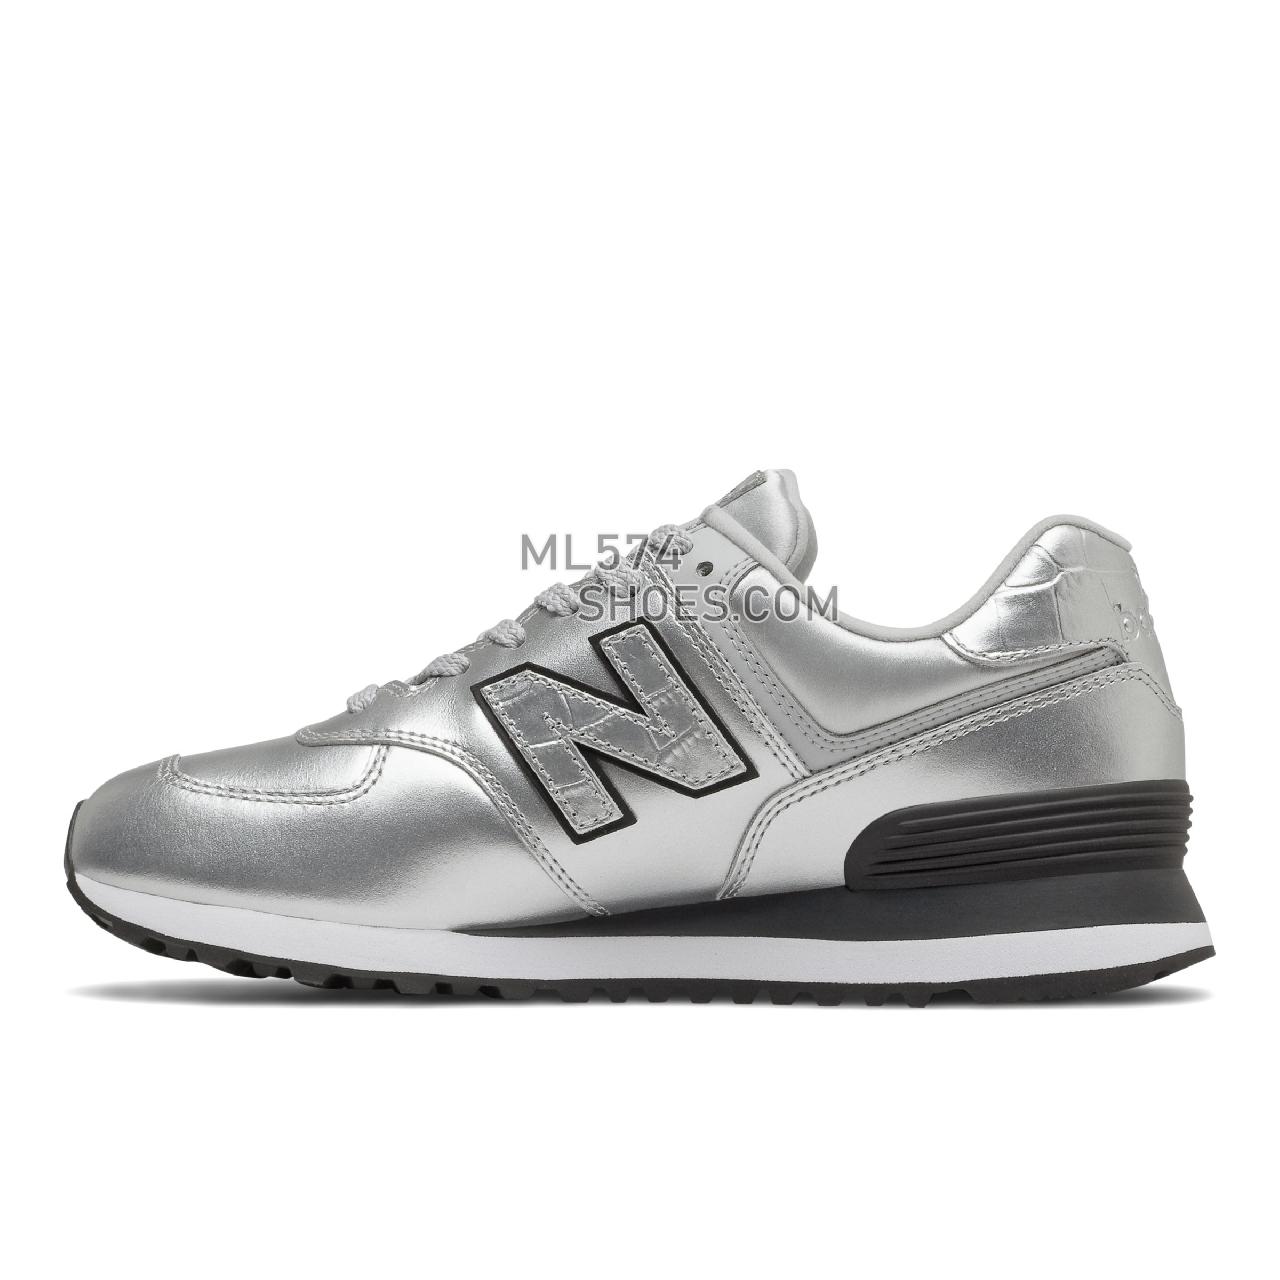 New Balance 574 - Women's Classic Sneakers - Silver with Black - WL574PN2